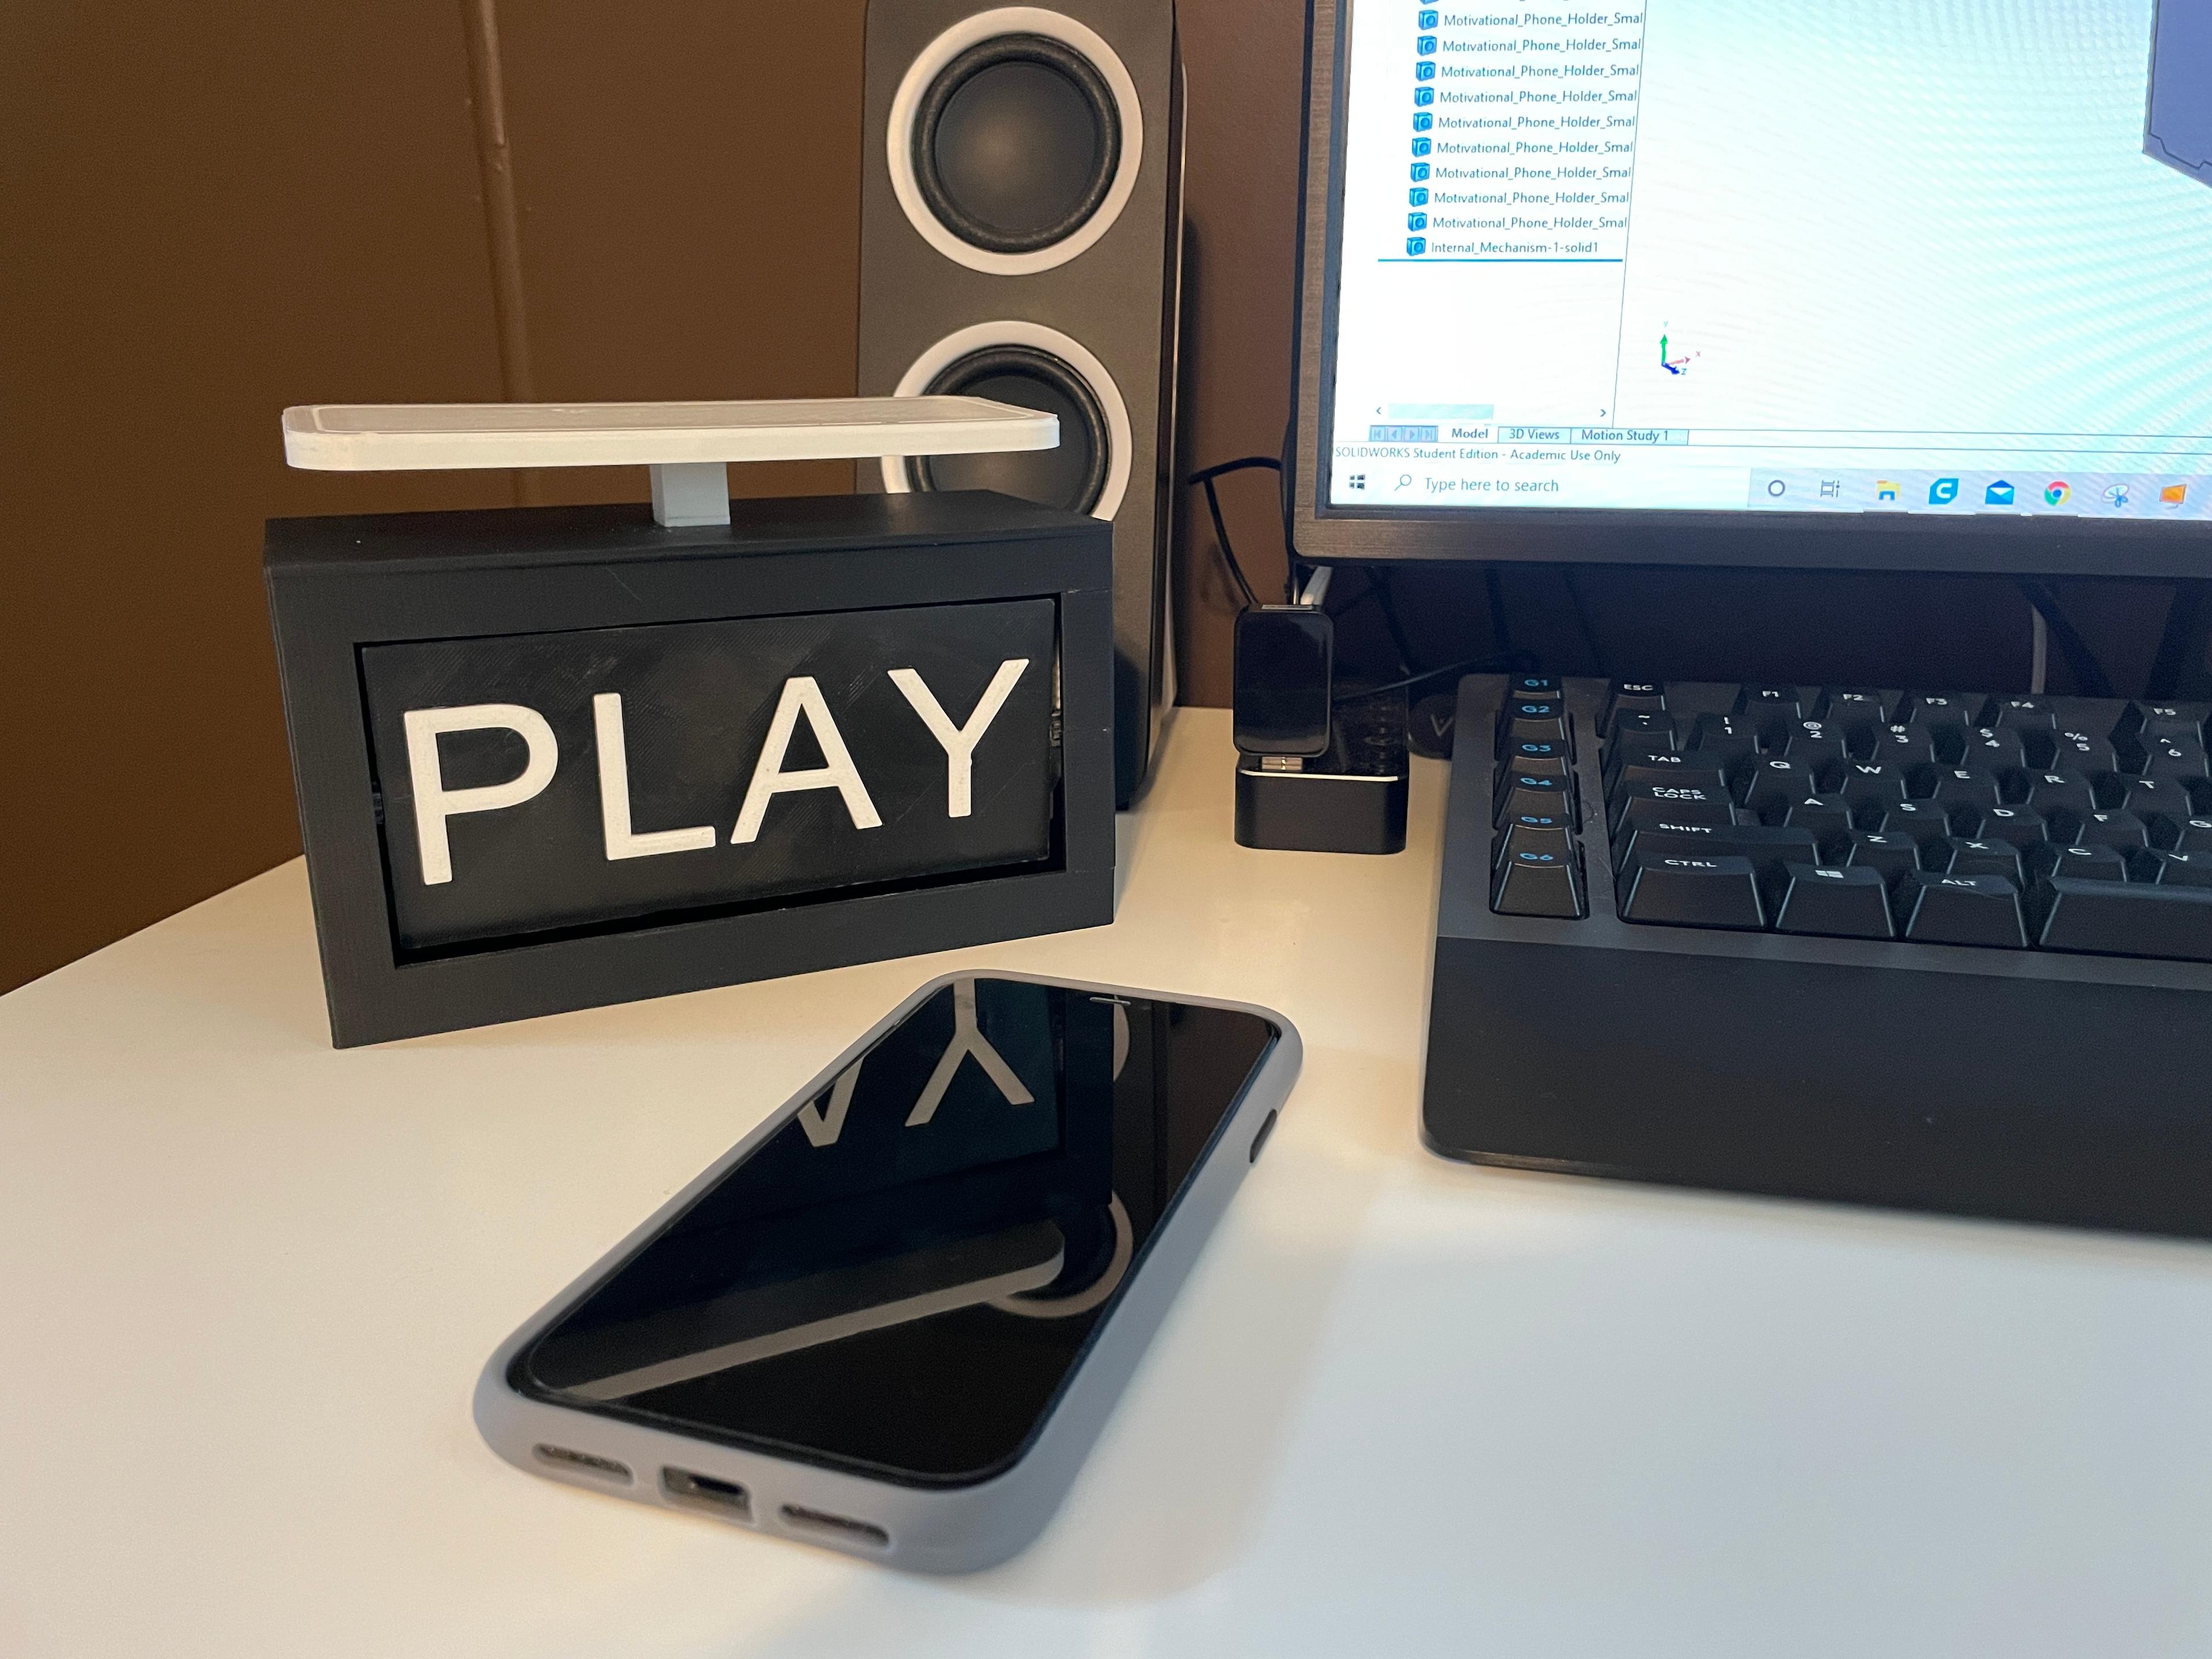 Motivational Phone Holder - Photo of it on a desk in action - 3d model